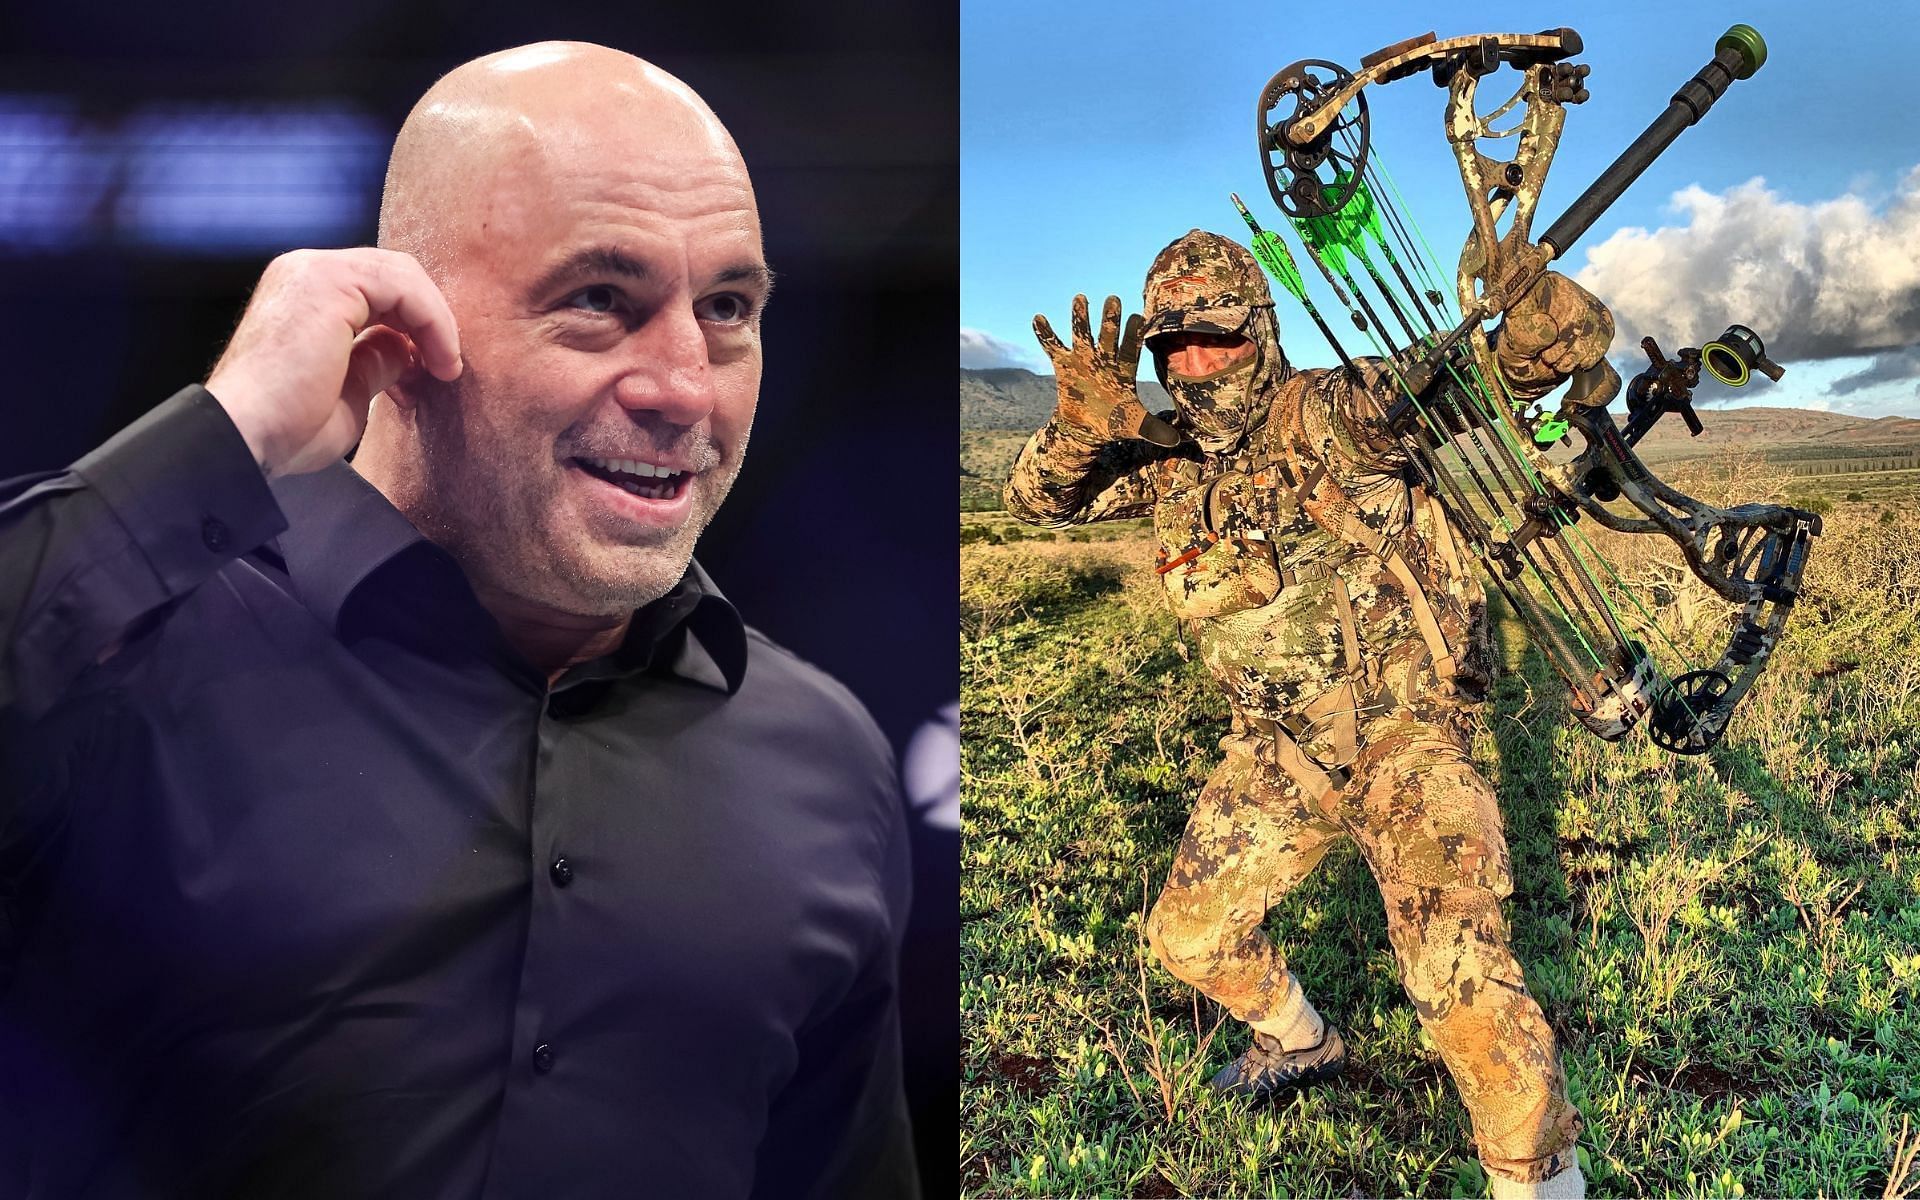 Joe Rogan at UFC 273 (Left) and Rogan during a hunting expedition (Right) [Image courtesy: Getty Images and @joerogan Instagram]